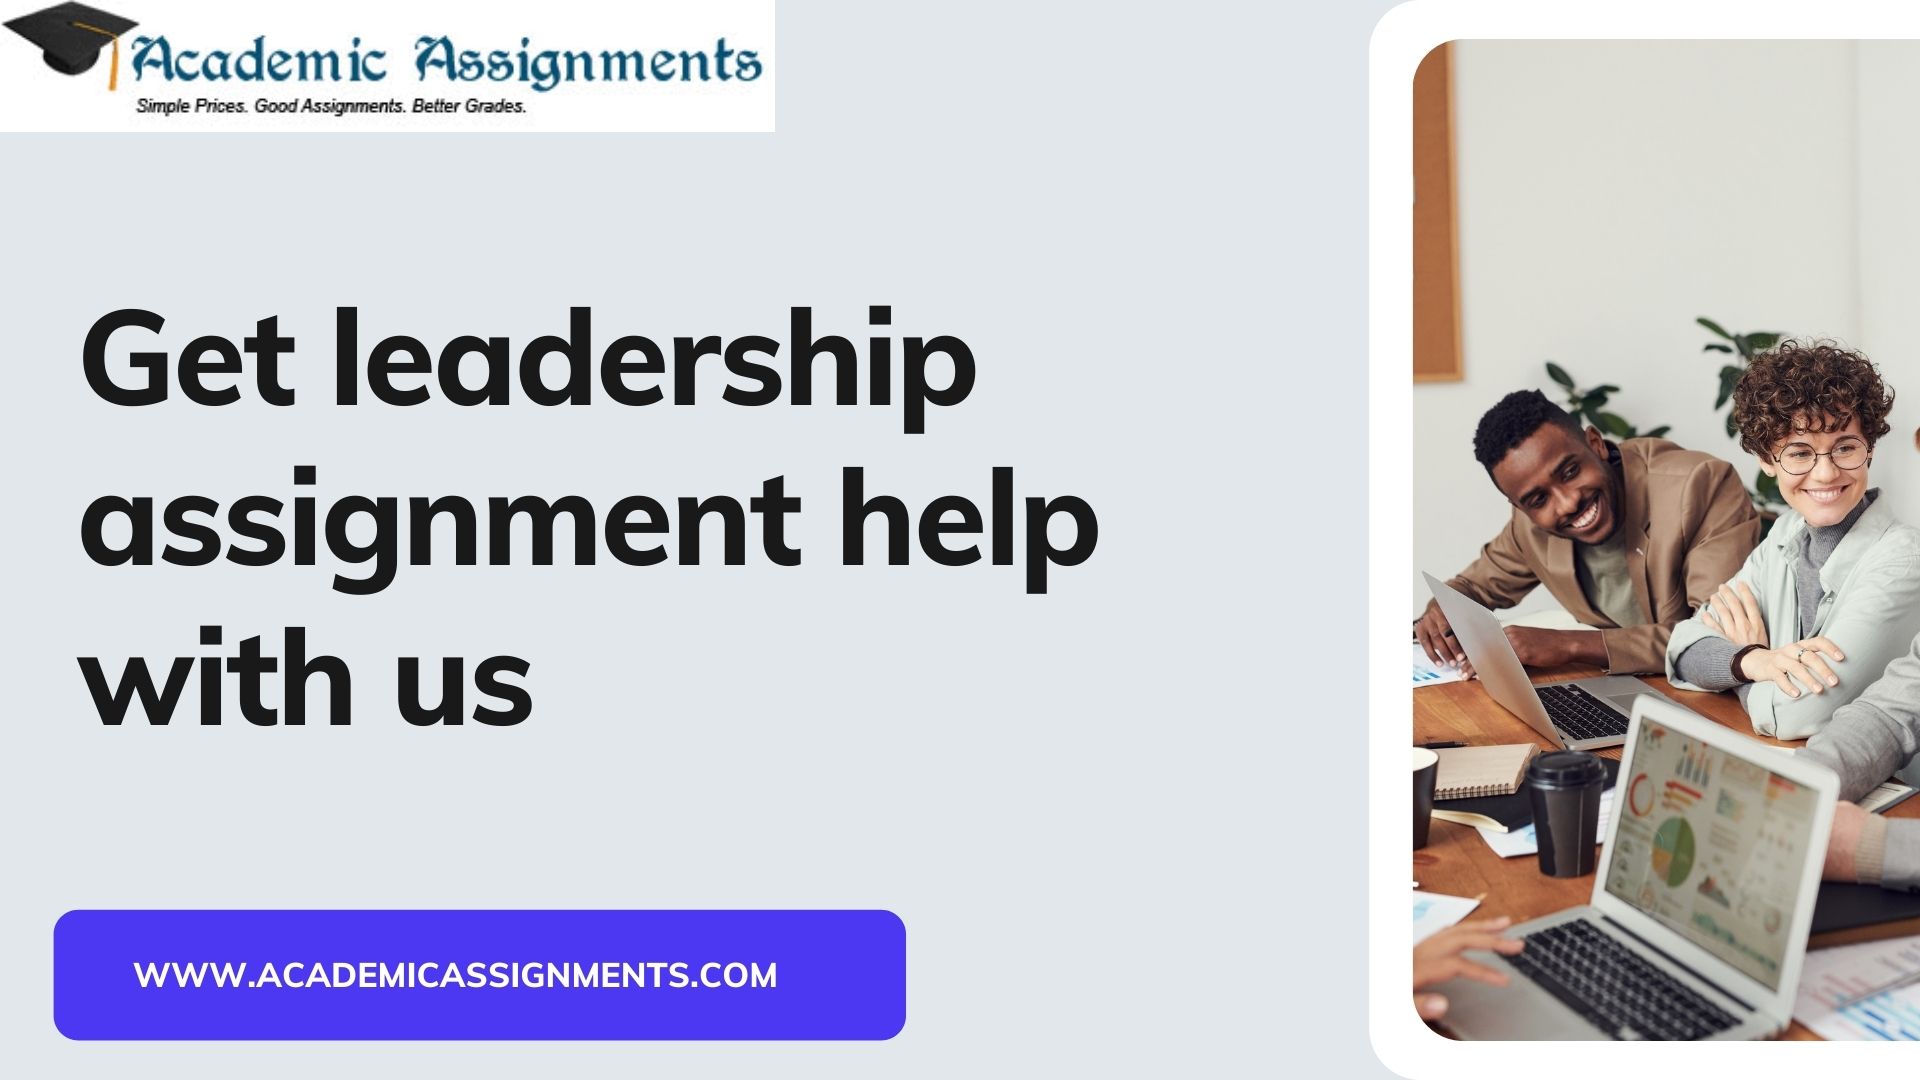 Get leadership assignment help with us